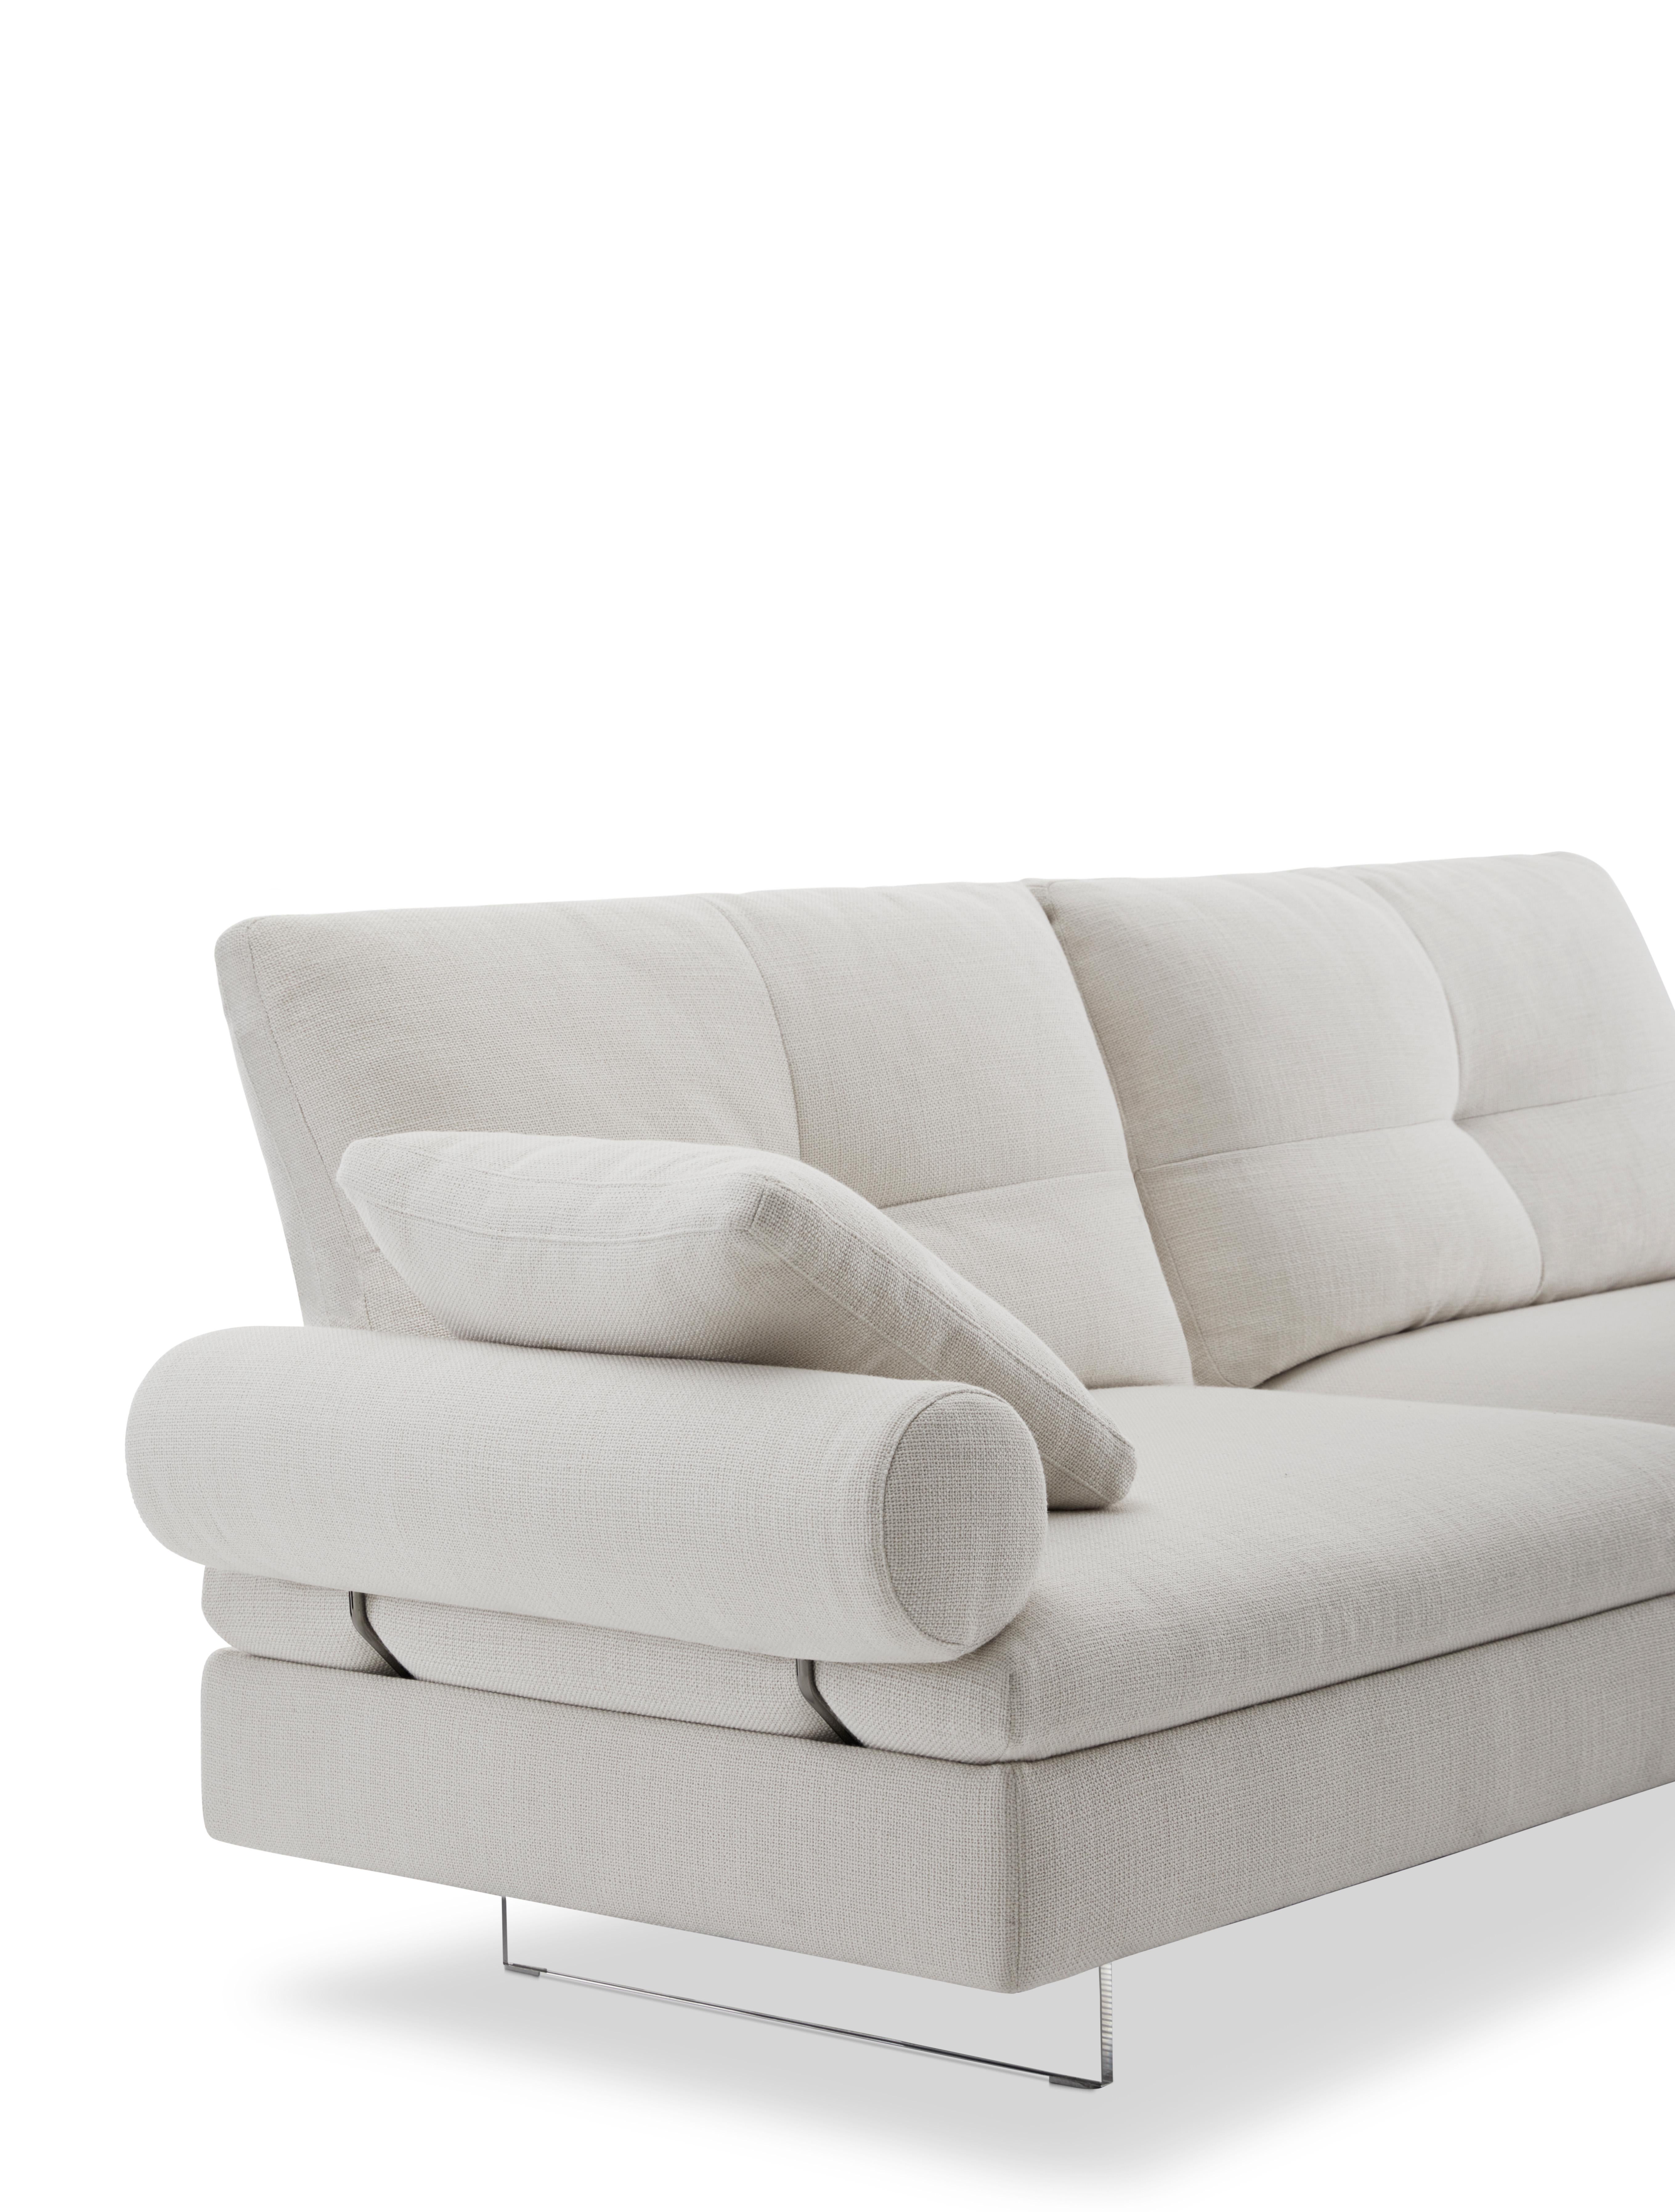 Modern Limes New Sofa in Avant Après Upholstery and Armrest with Roll by Sergio Bicego For Sale